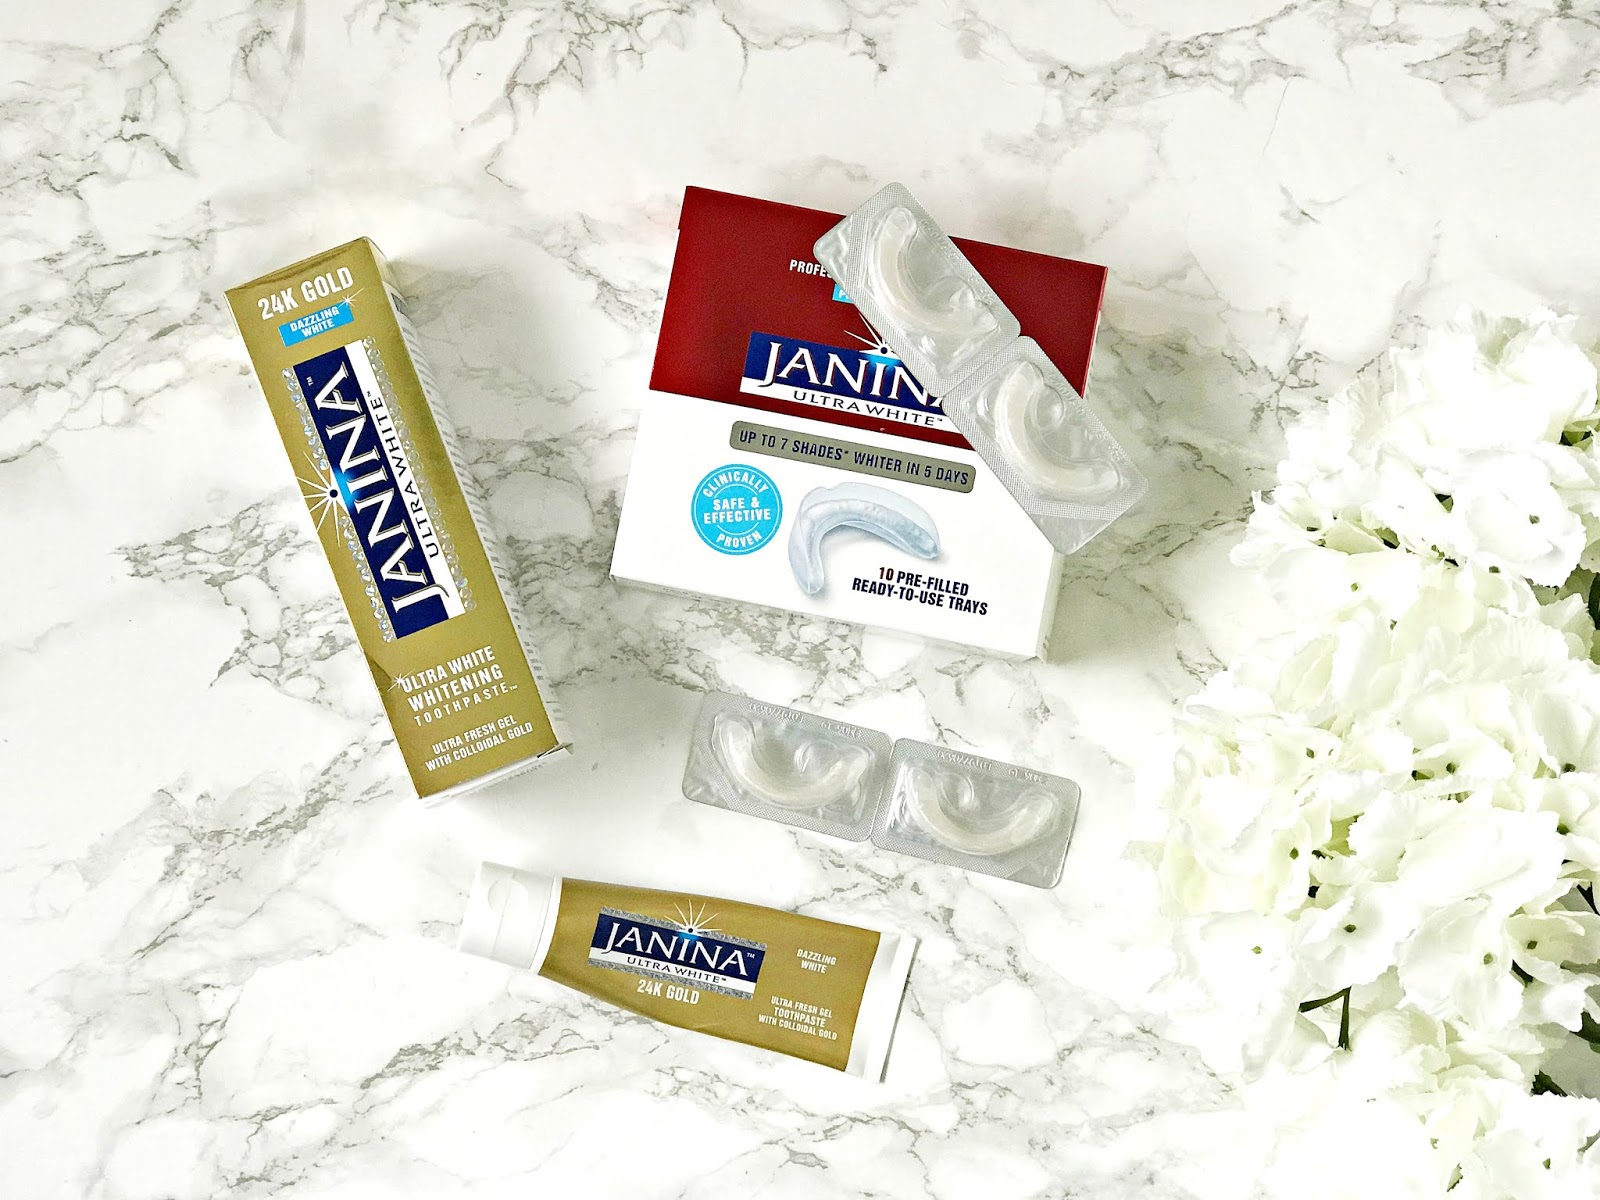 Janina, National Smile Month, 24K Gold Toothpaste, Maxiwhite Professtional Teeth Whitening Pre-Filled Trays, Teeth Whitening, review, 